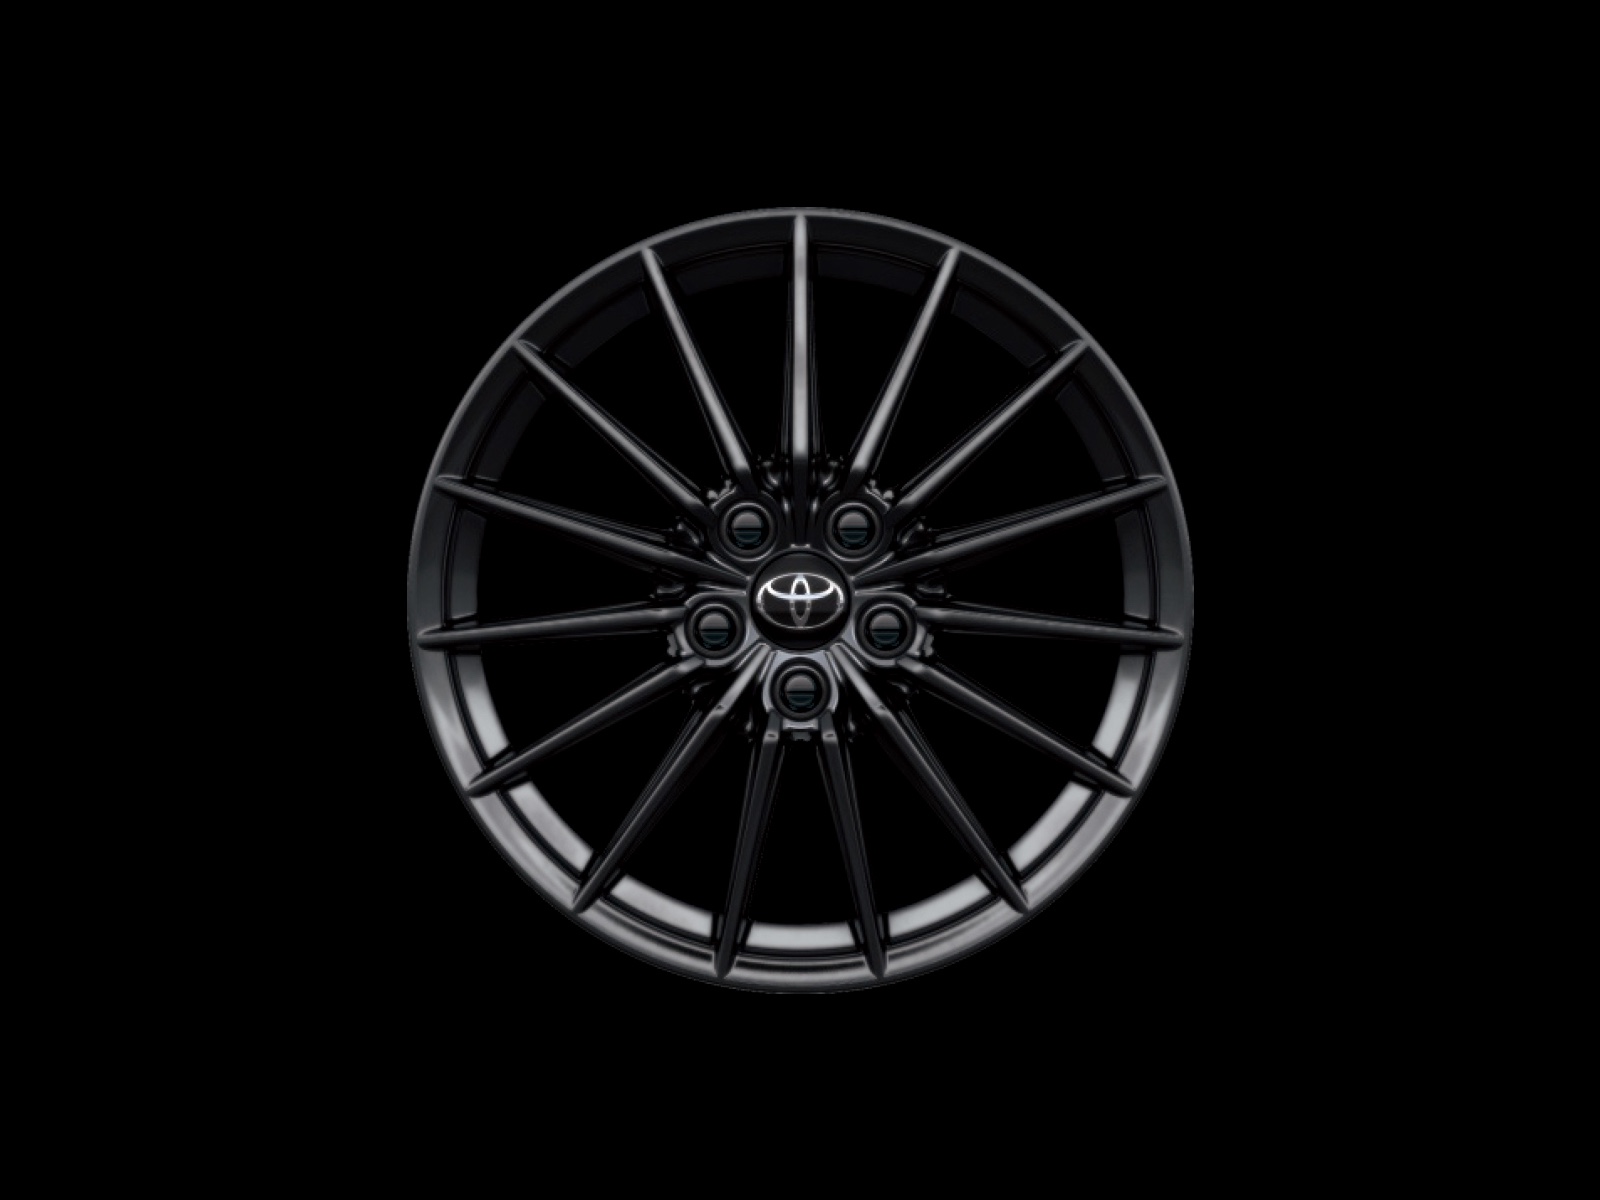 18" forged alloy wheels